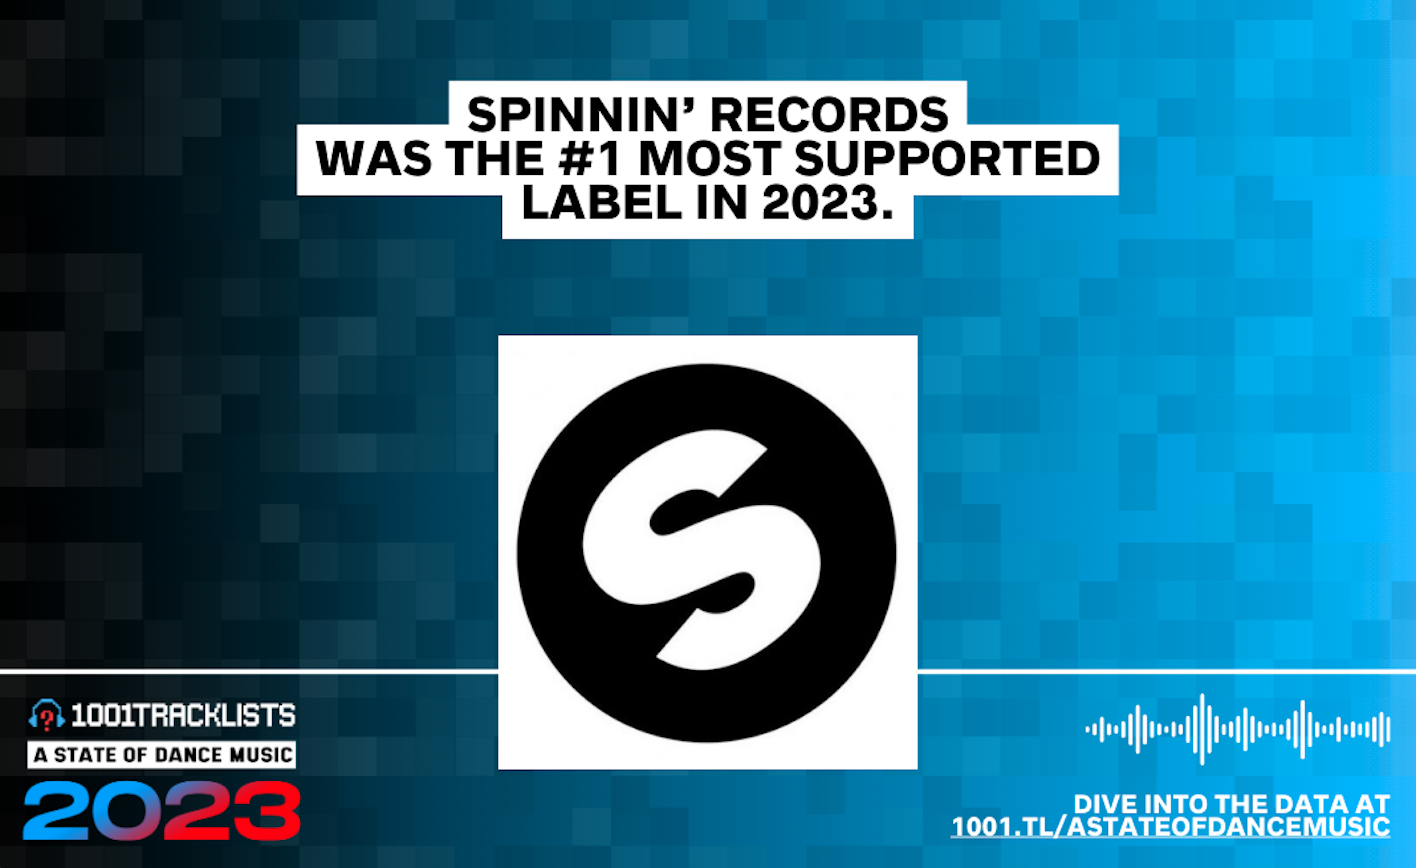 Spinnin' Records Becomes Five-Time Winner of #1 Top Label of the Year